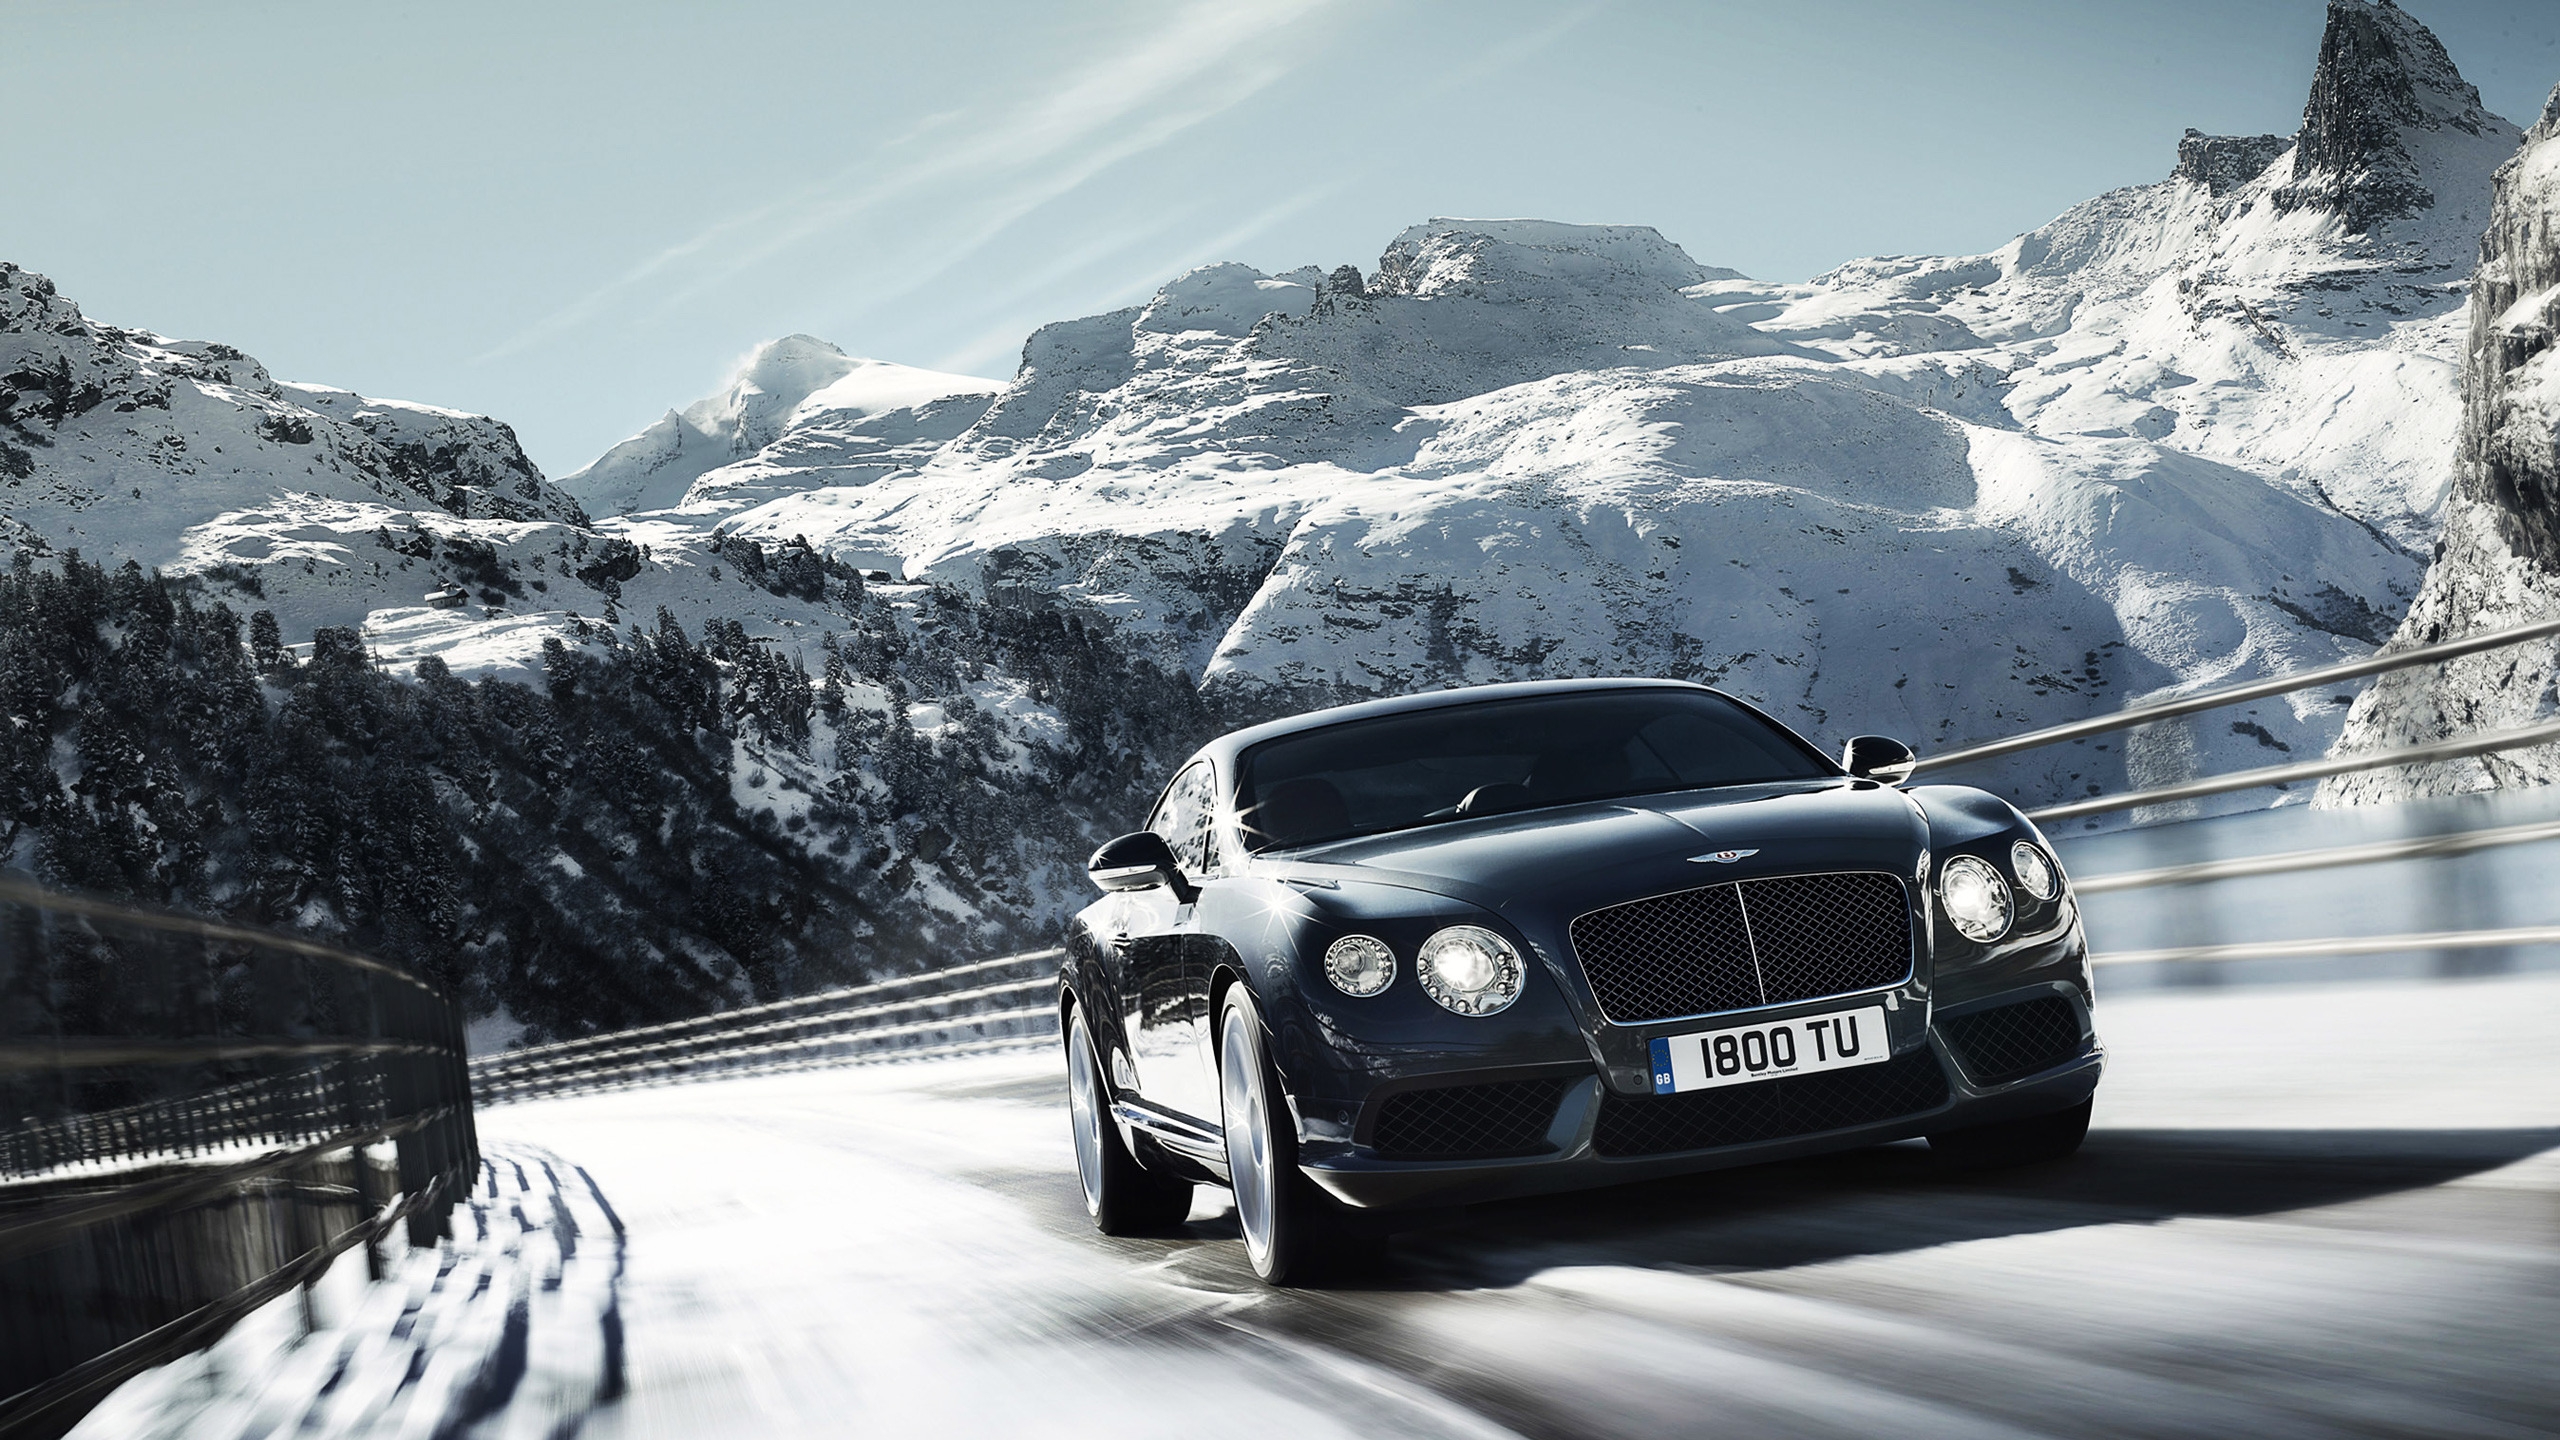 Bentley Continental V8 for 2560x1440 HDTV resolution